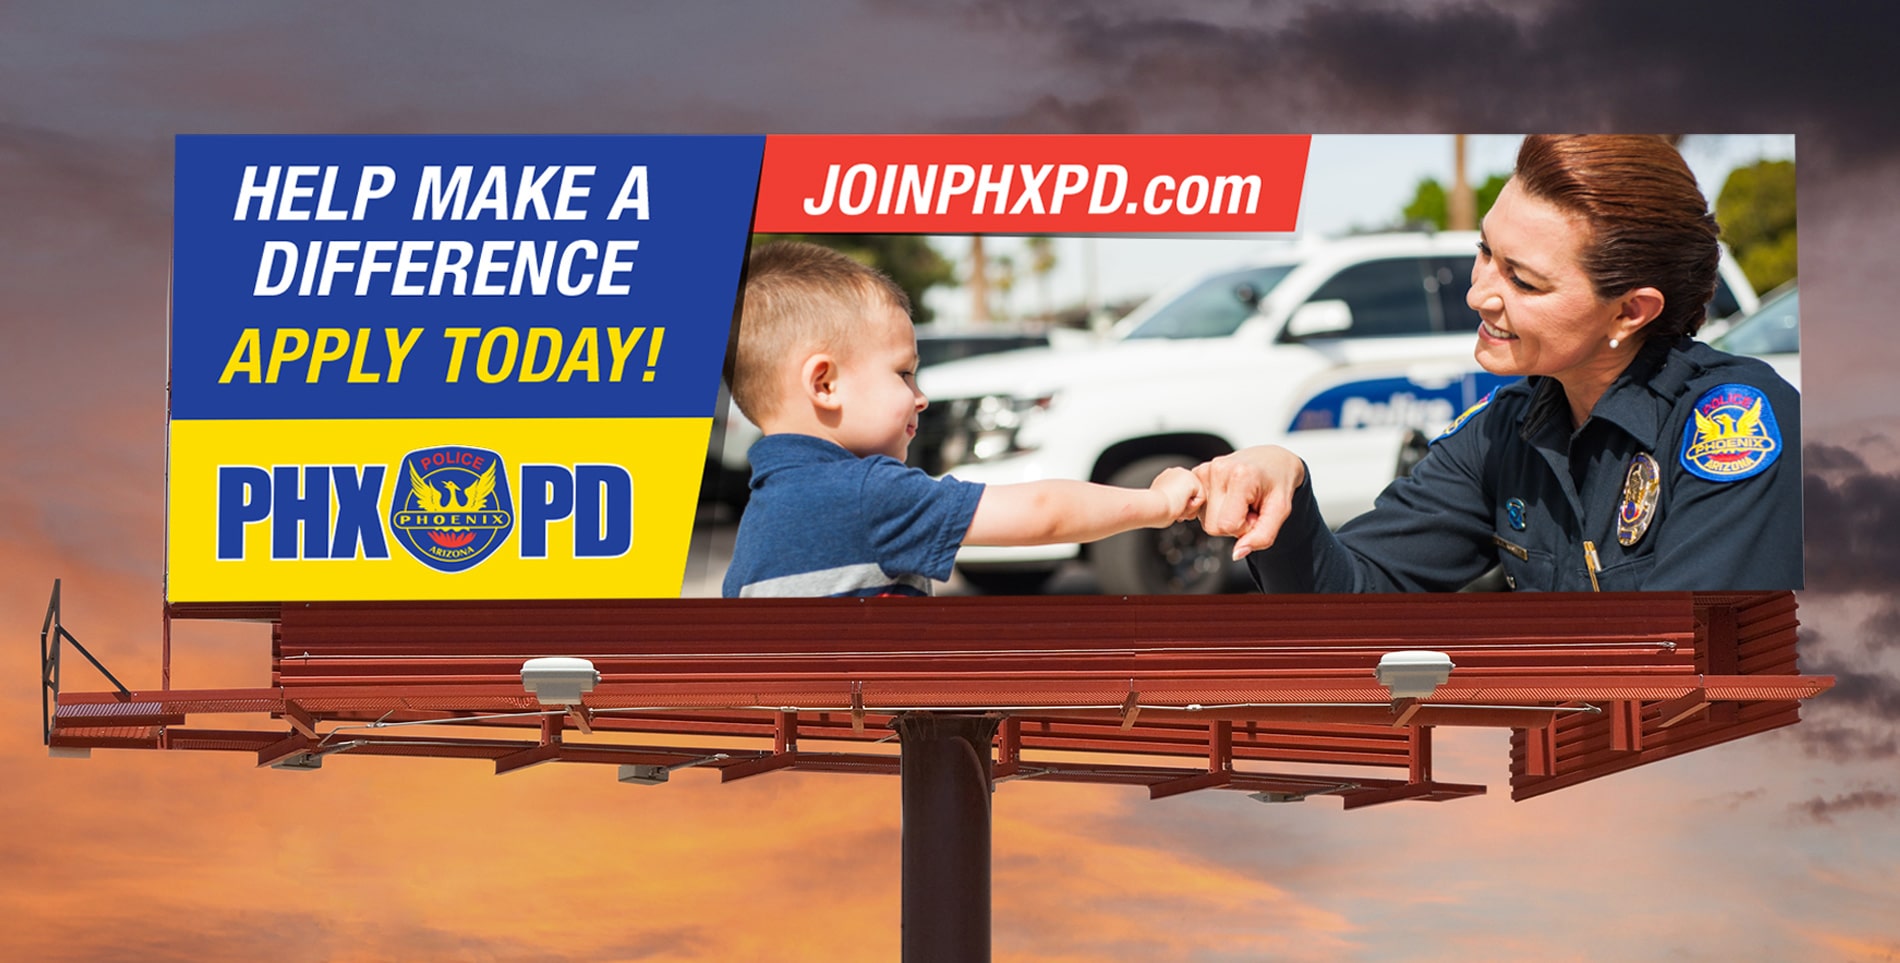 A Billboard ad for Phoenix Police Department "Help make a difference. Apply Today!"